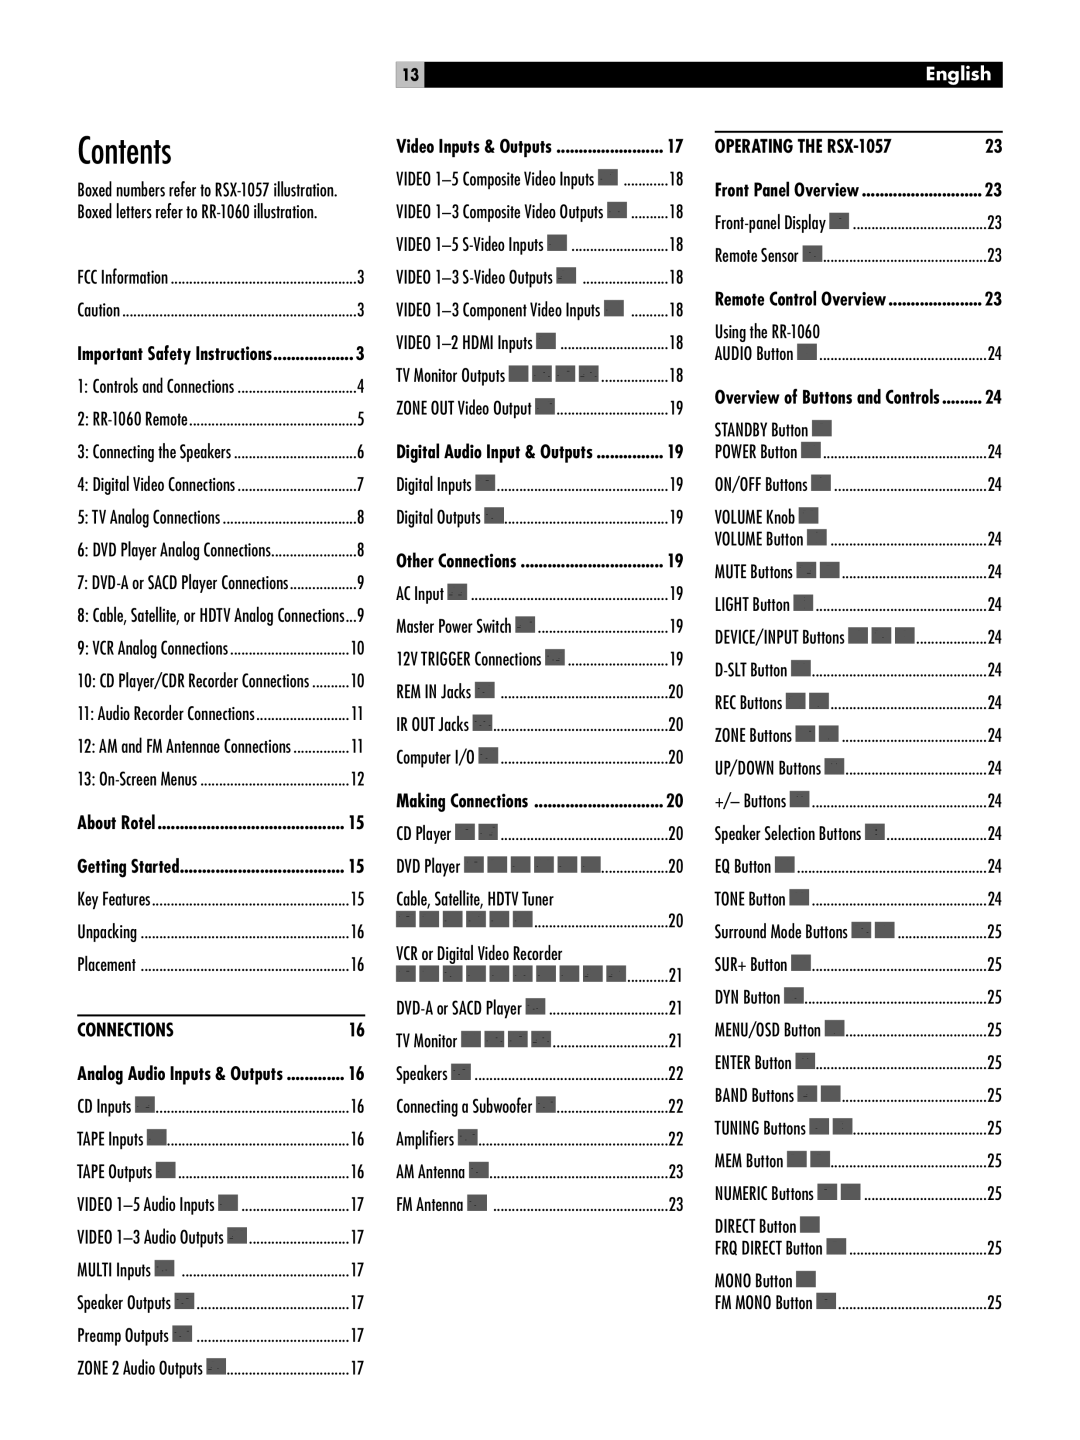 Rotel owner manual Contents, Connections, OPERATING THE RSX-1057, English 